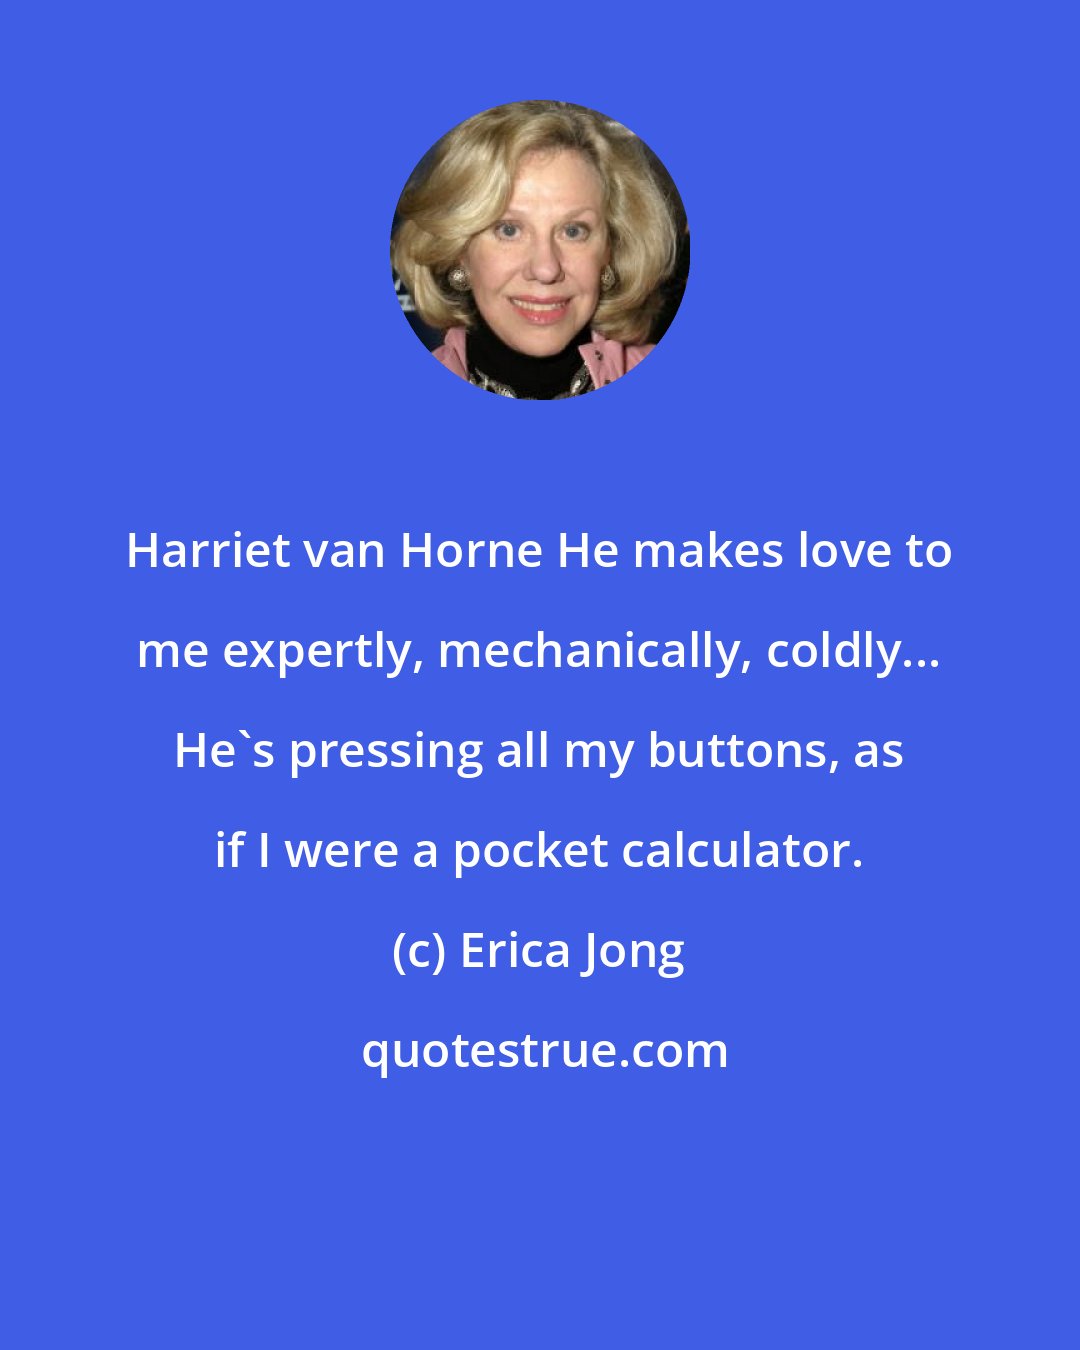 Erica Jong: Harriet van Horne He makes love to me expertly, mechanically, coldly... He's pressing all my buttons, as if I were a pocket calculator.